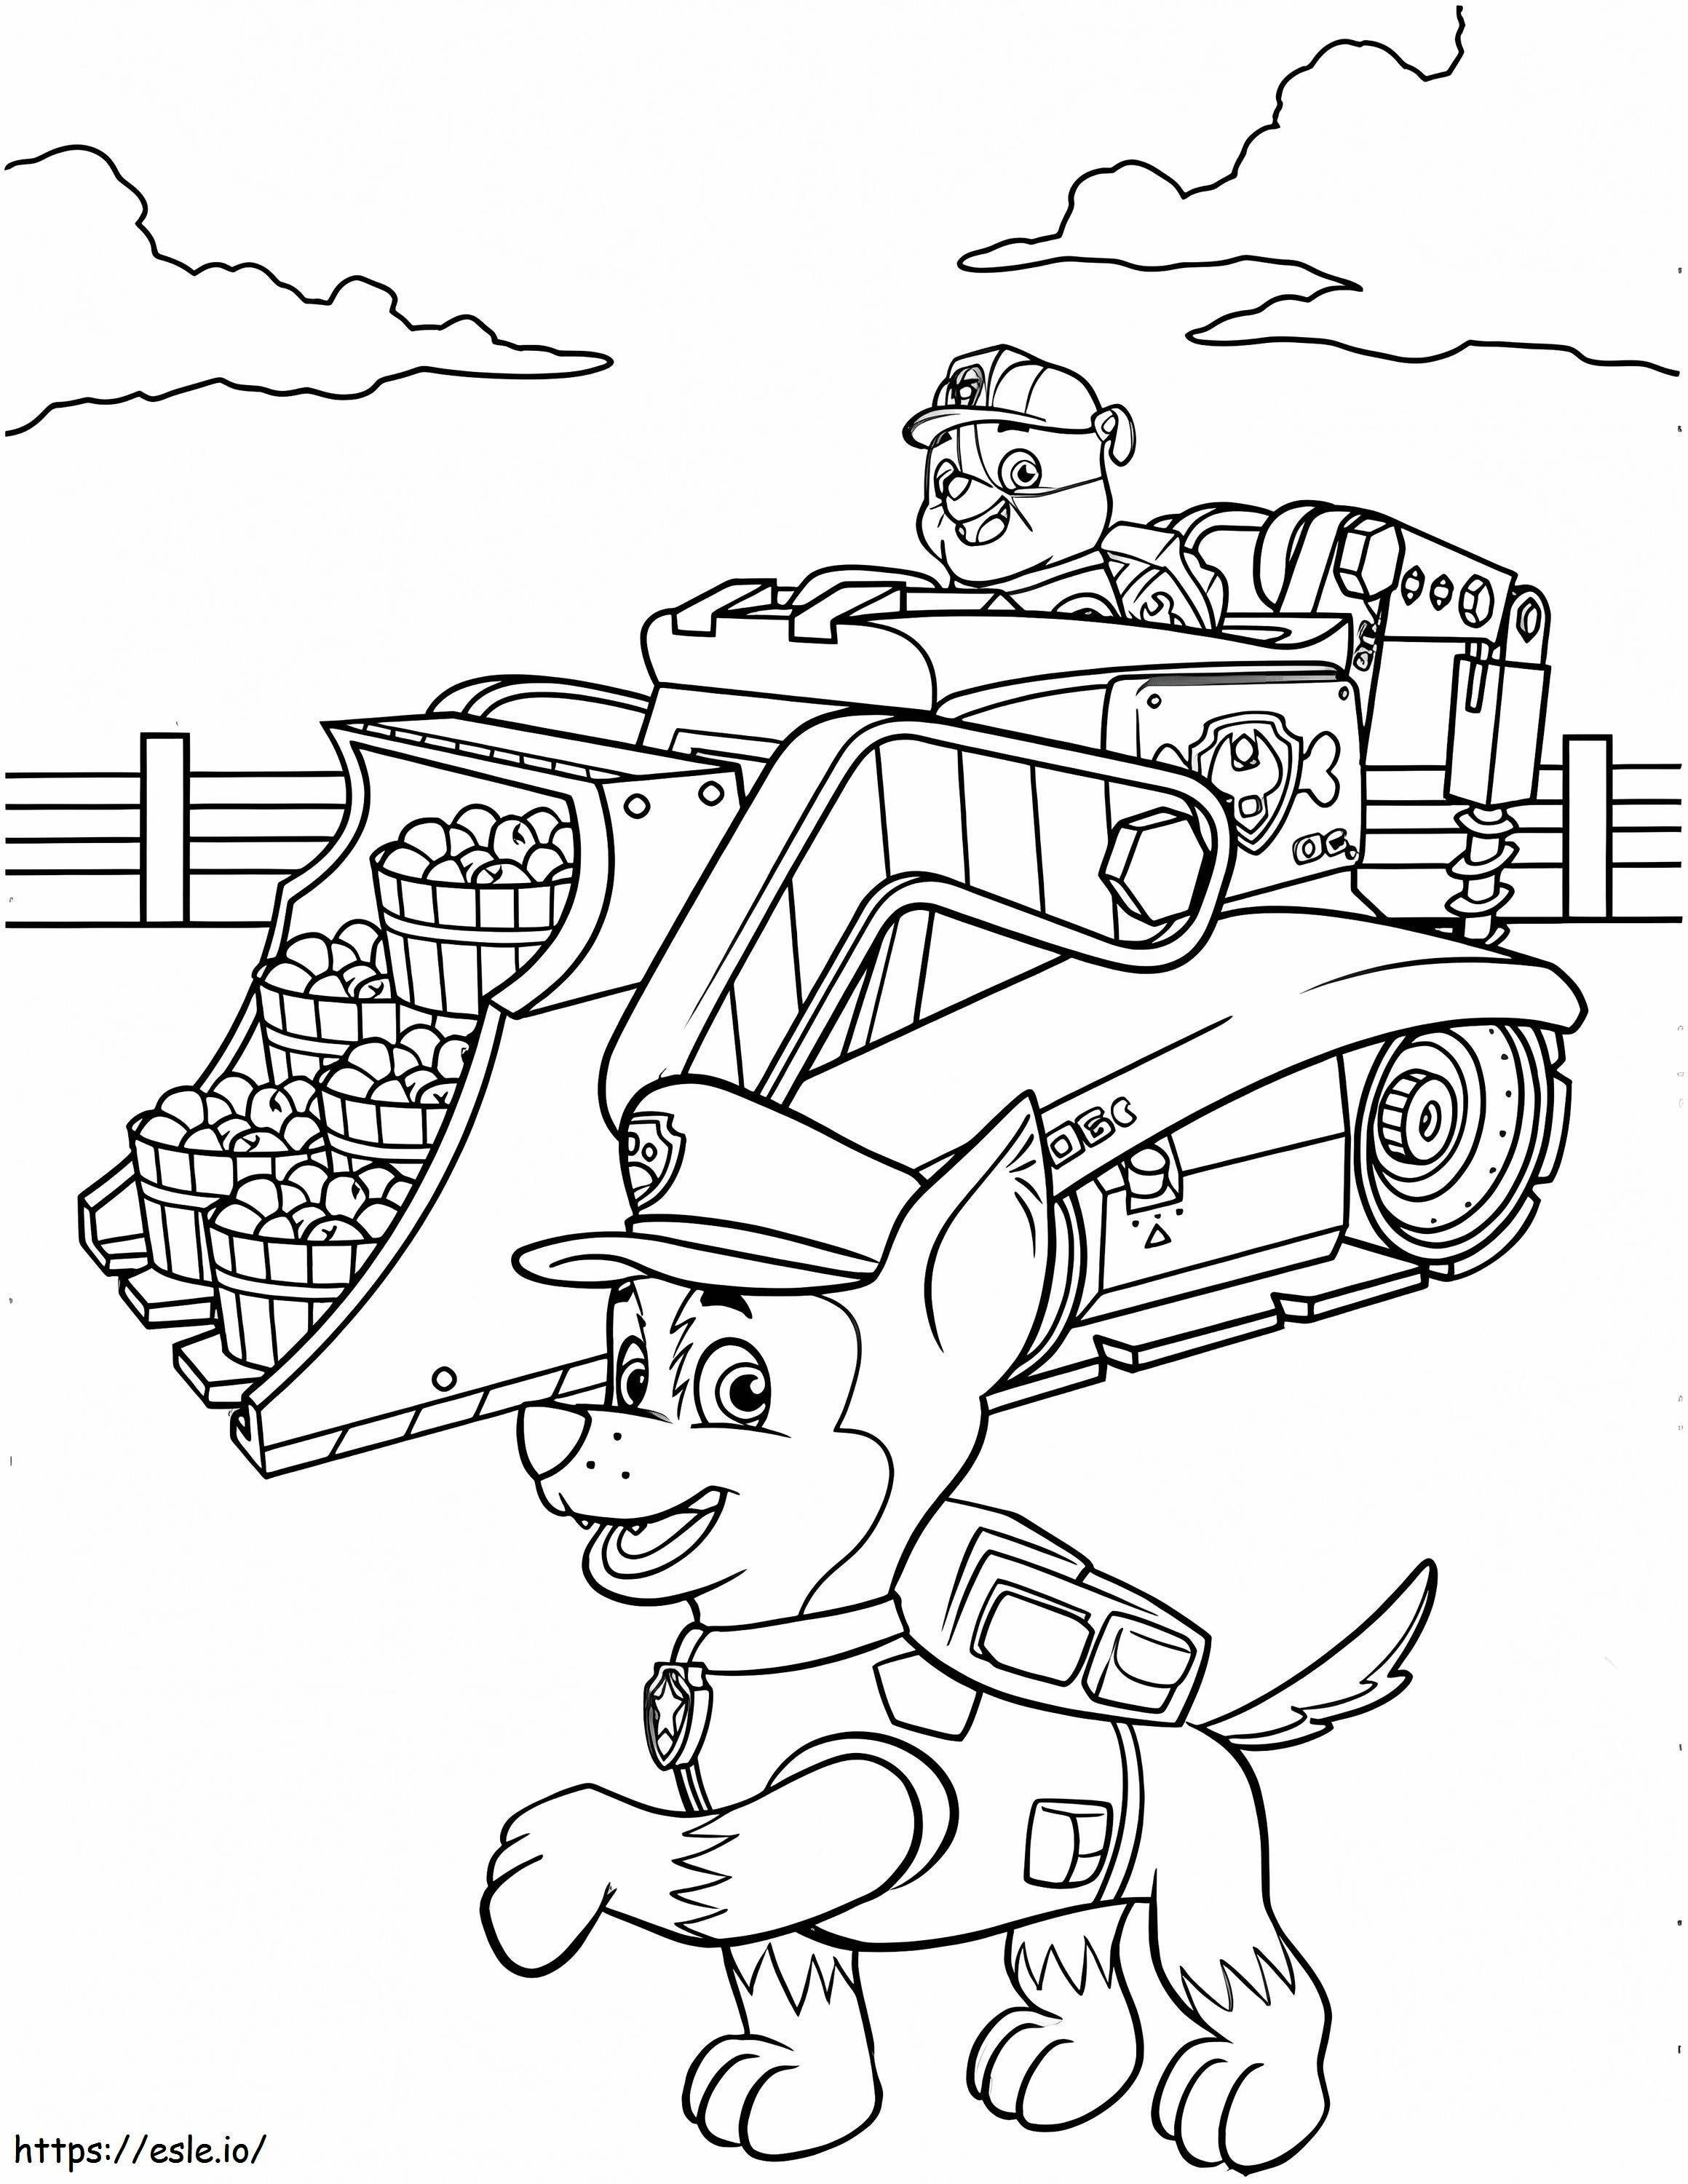 Chase Paw Patrol 16 coloring page